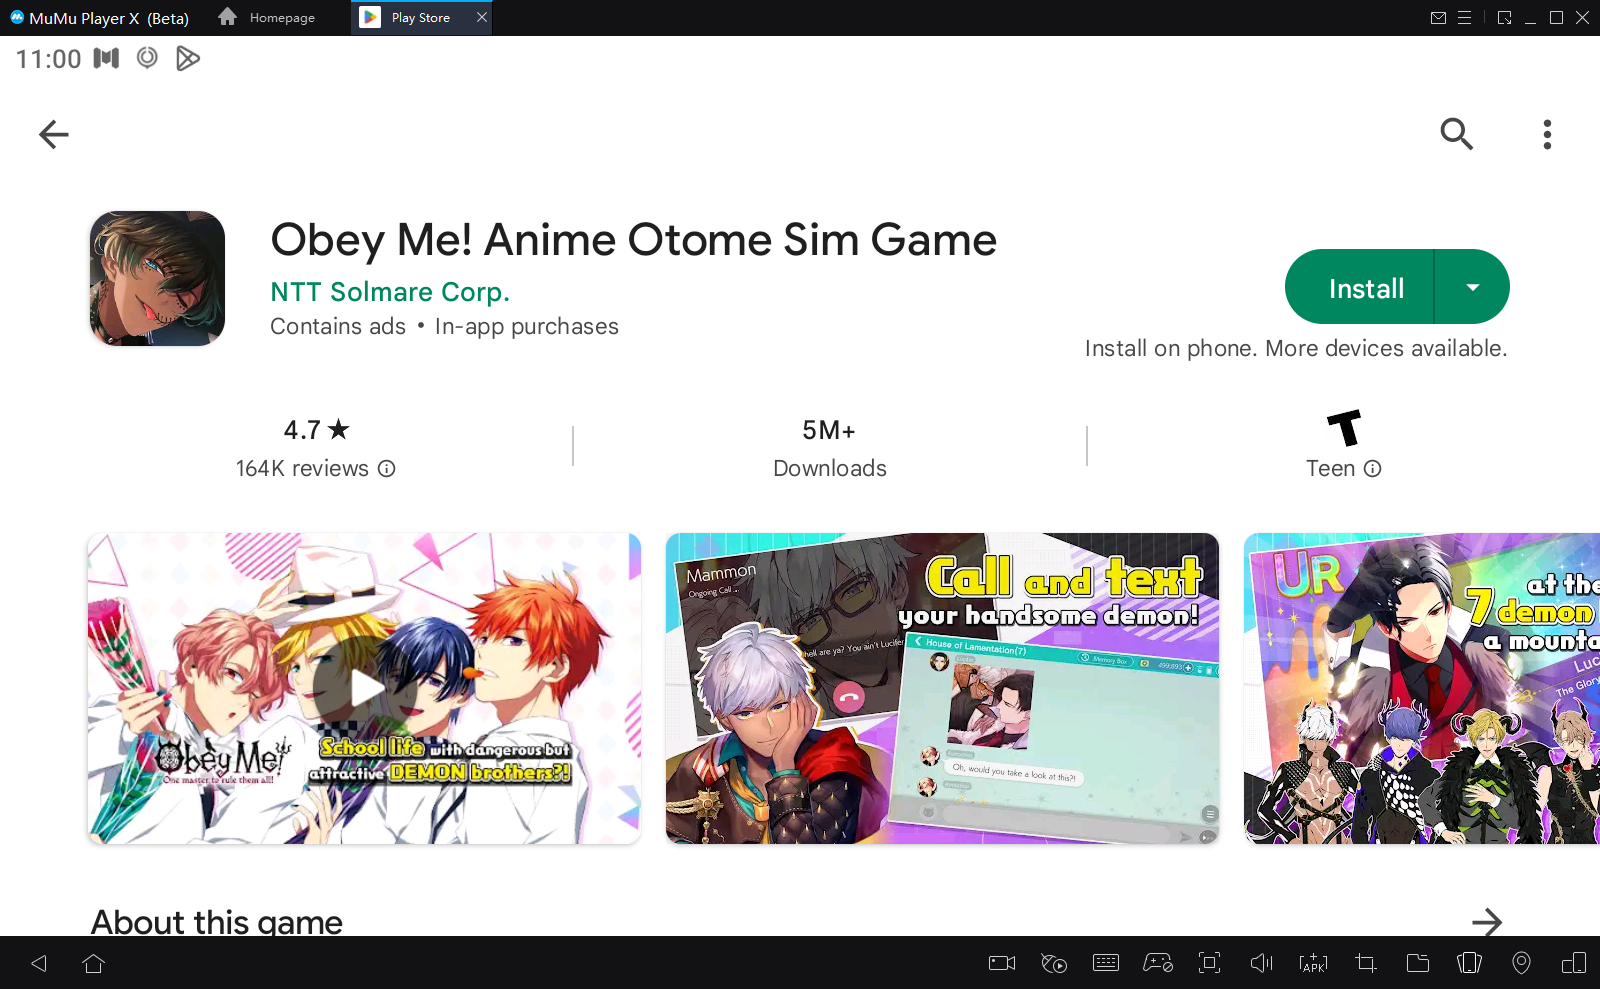 Obey Me! - Anime Otome Dating Sim on pc